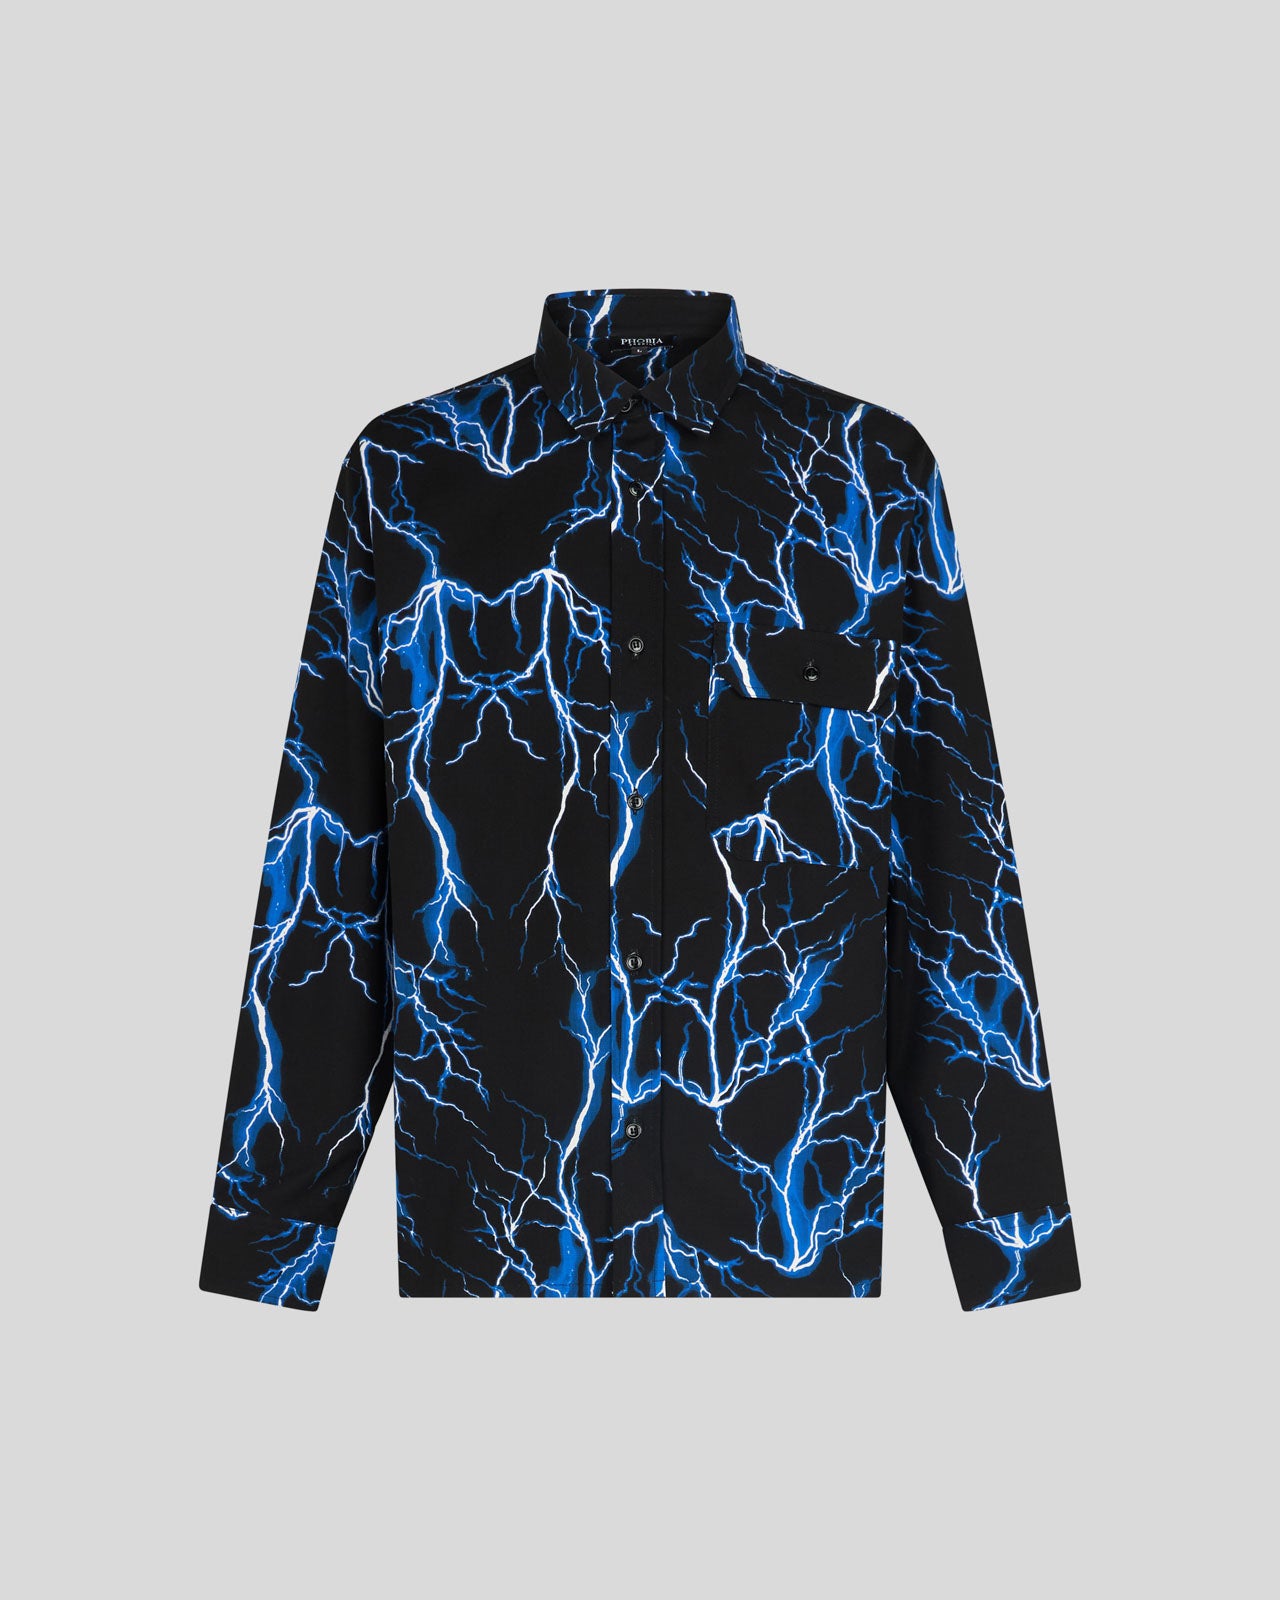 PHOBIA BLACK SHIRT WITH BLUE ALL OVER LIGHTNING